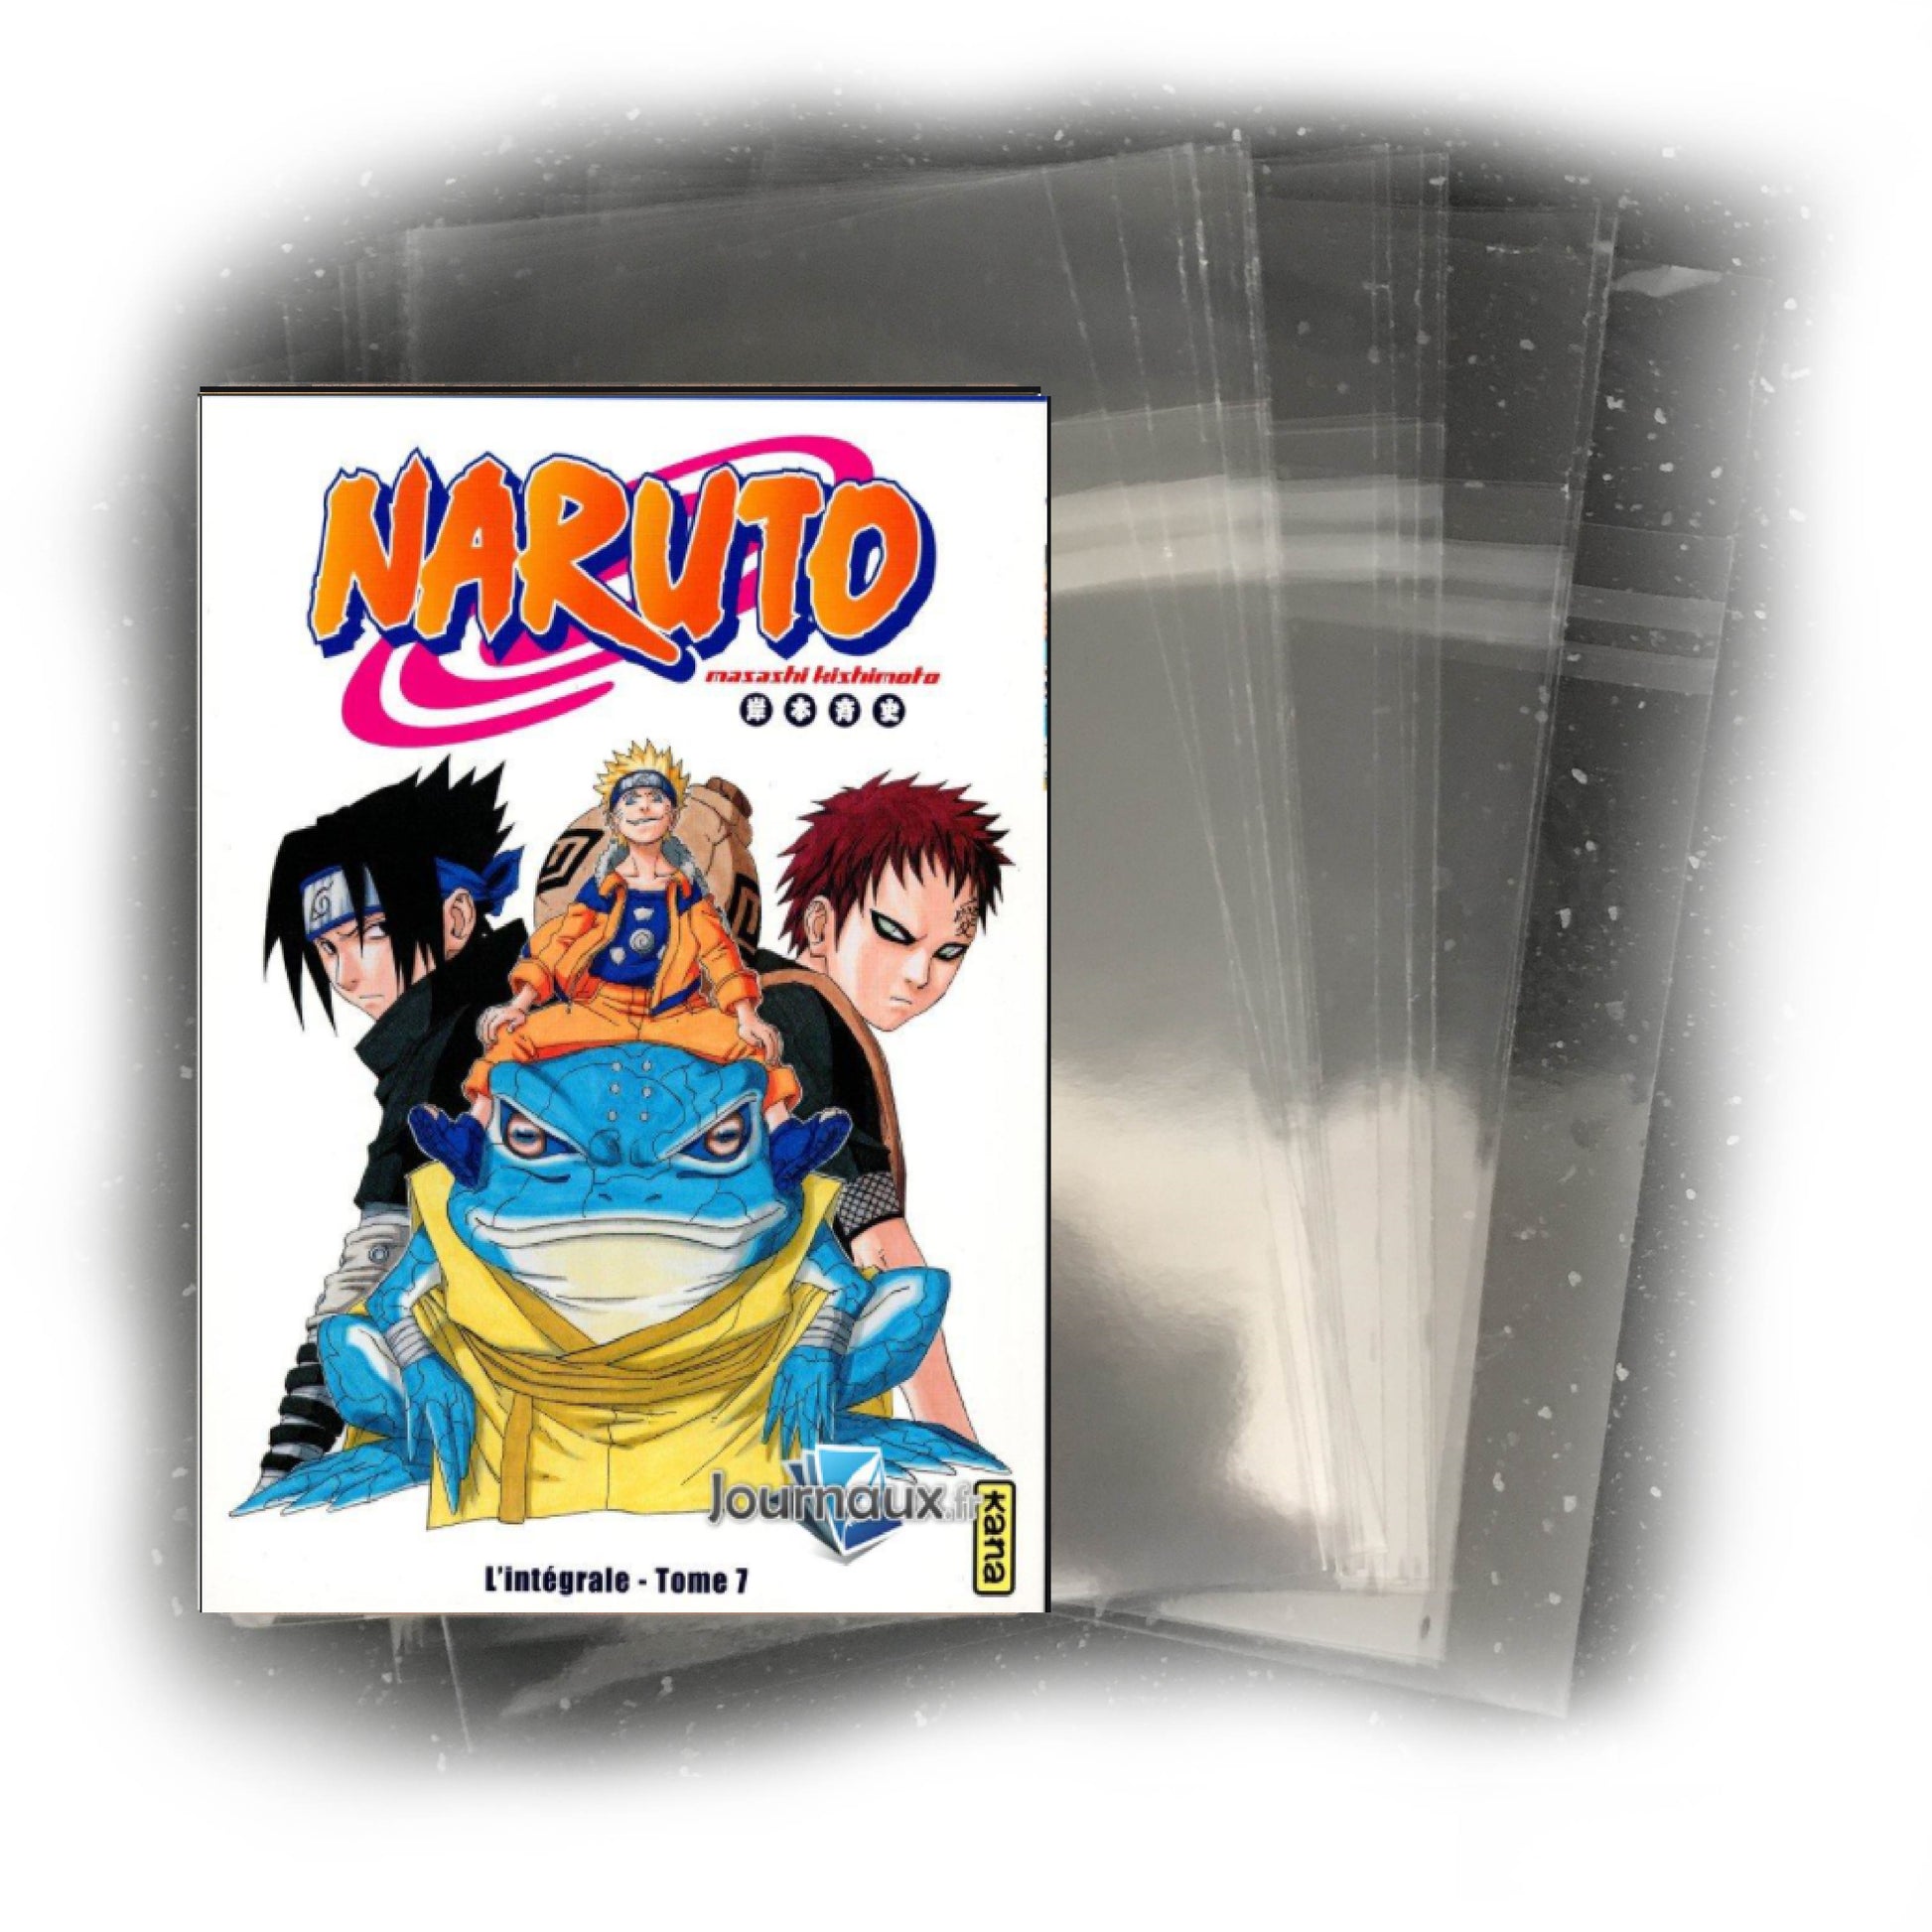 100 buste per MANGAS 140x190 mm – My-smartup